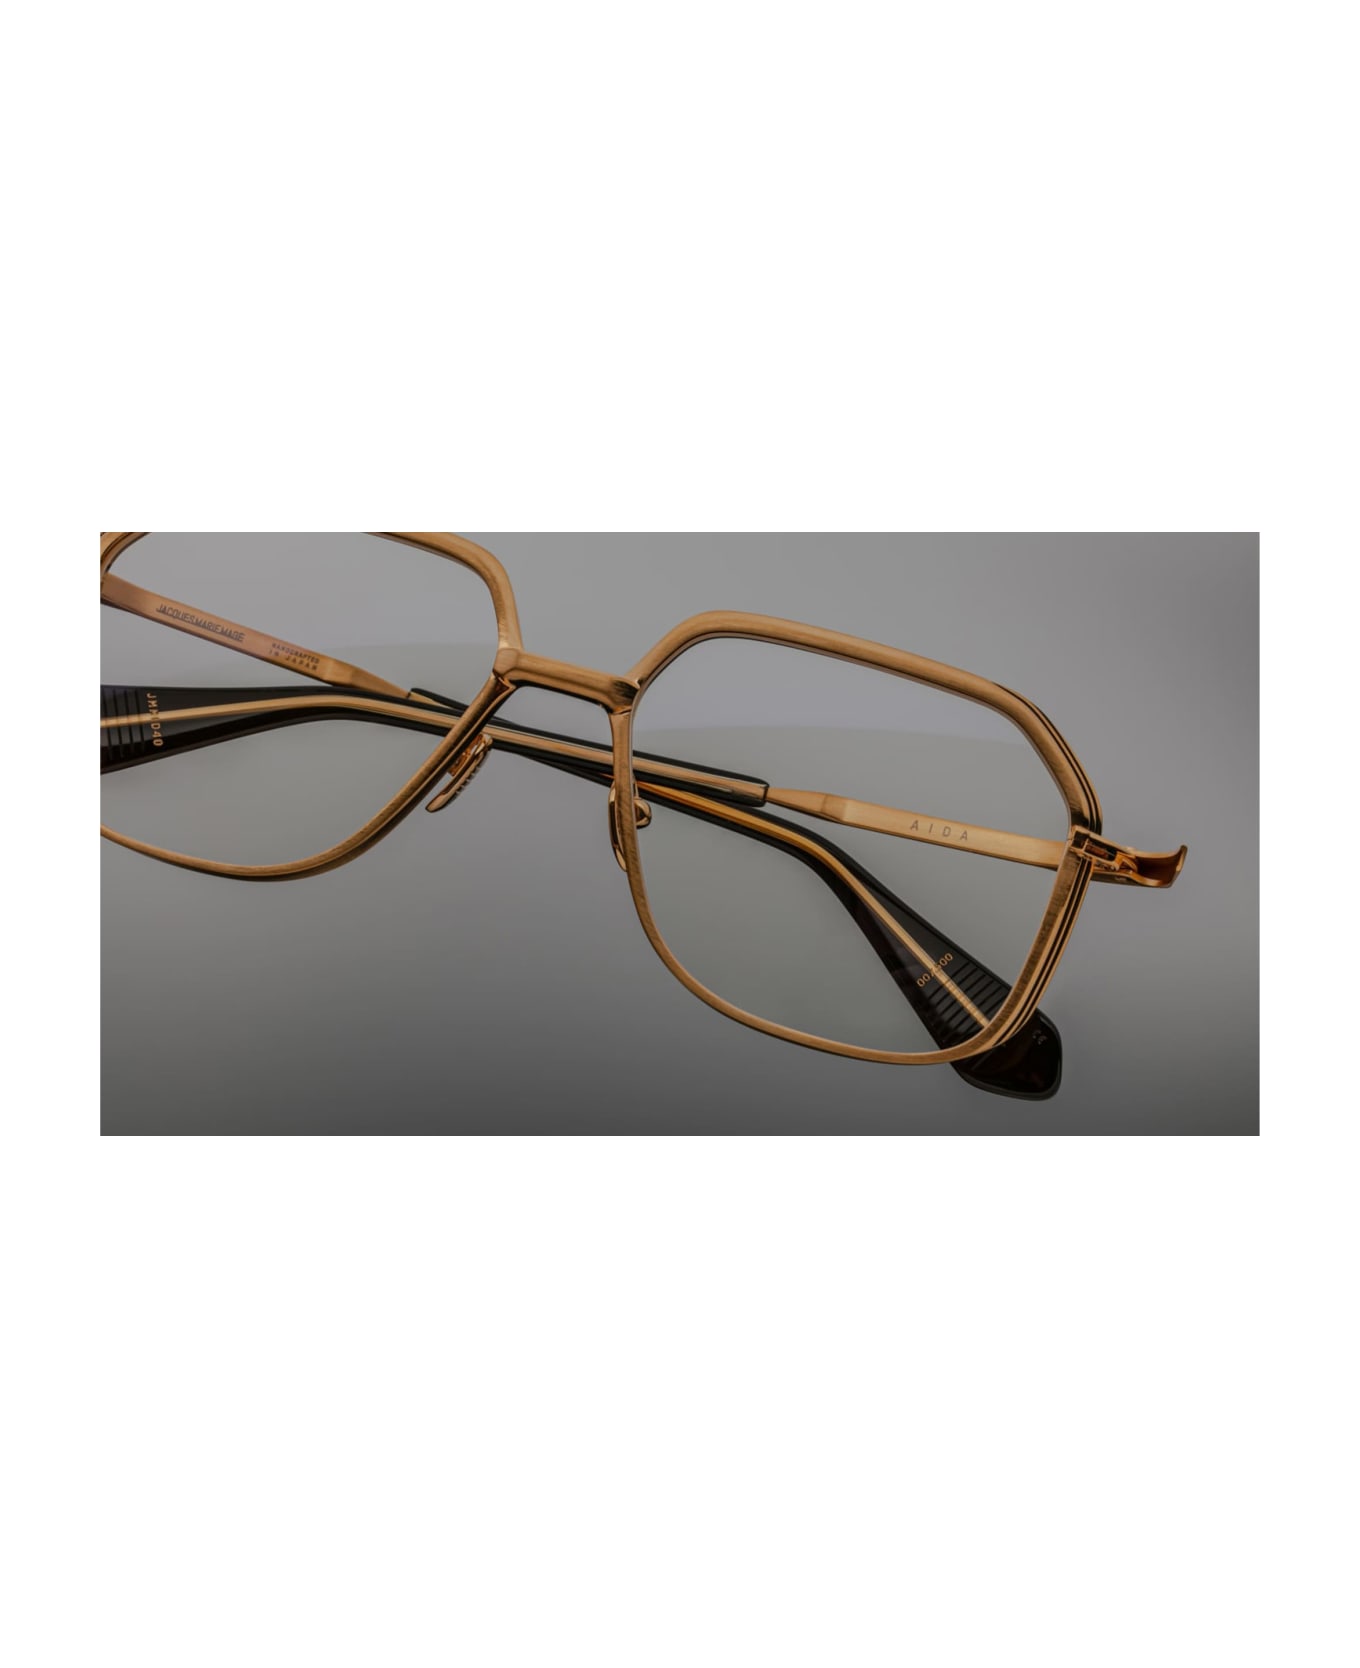 Jacques Marie Mage Aida - Gold Rx Glasses - Gold